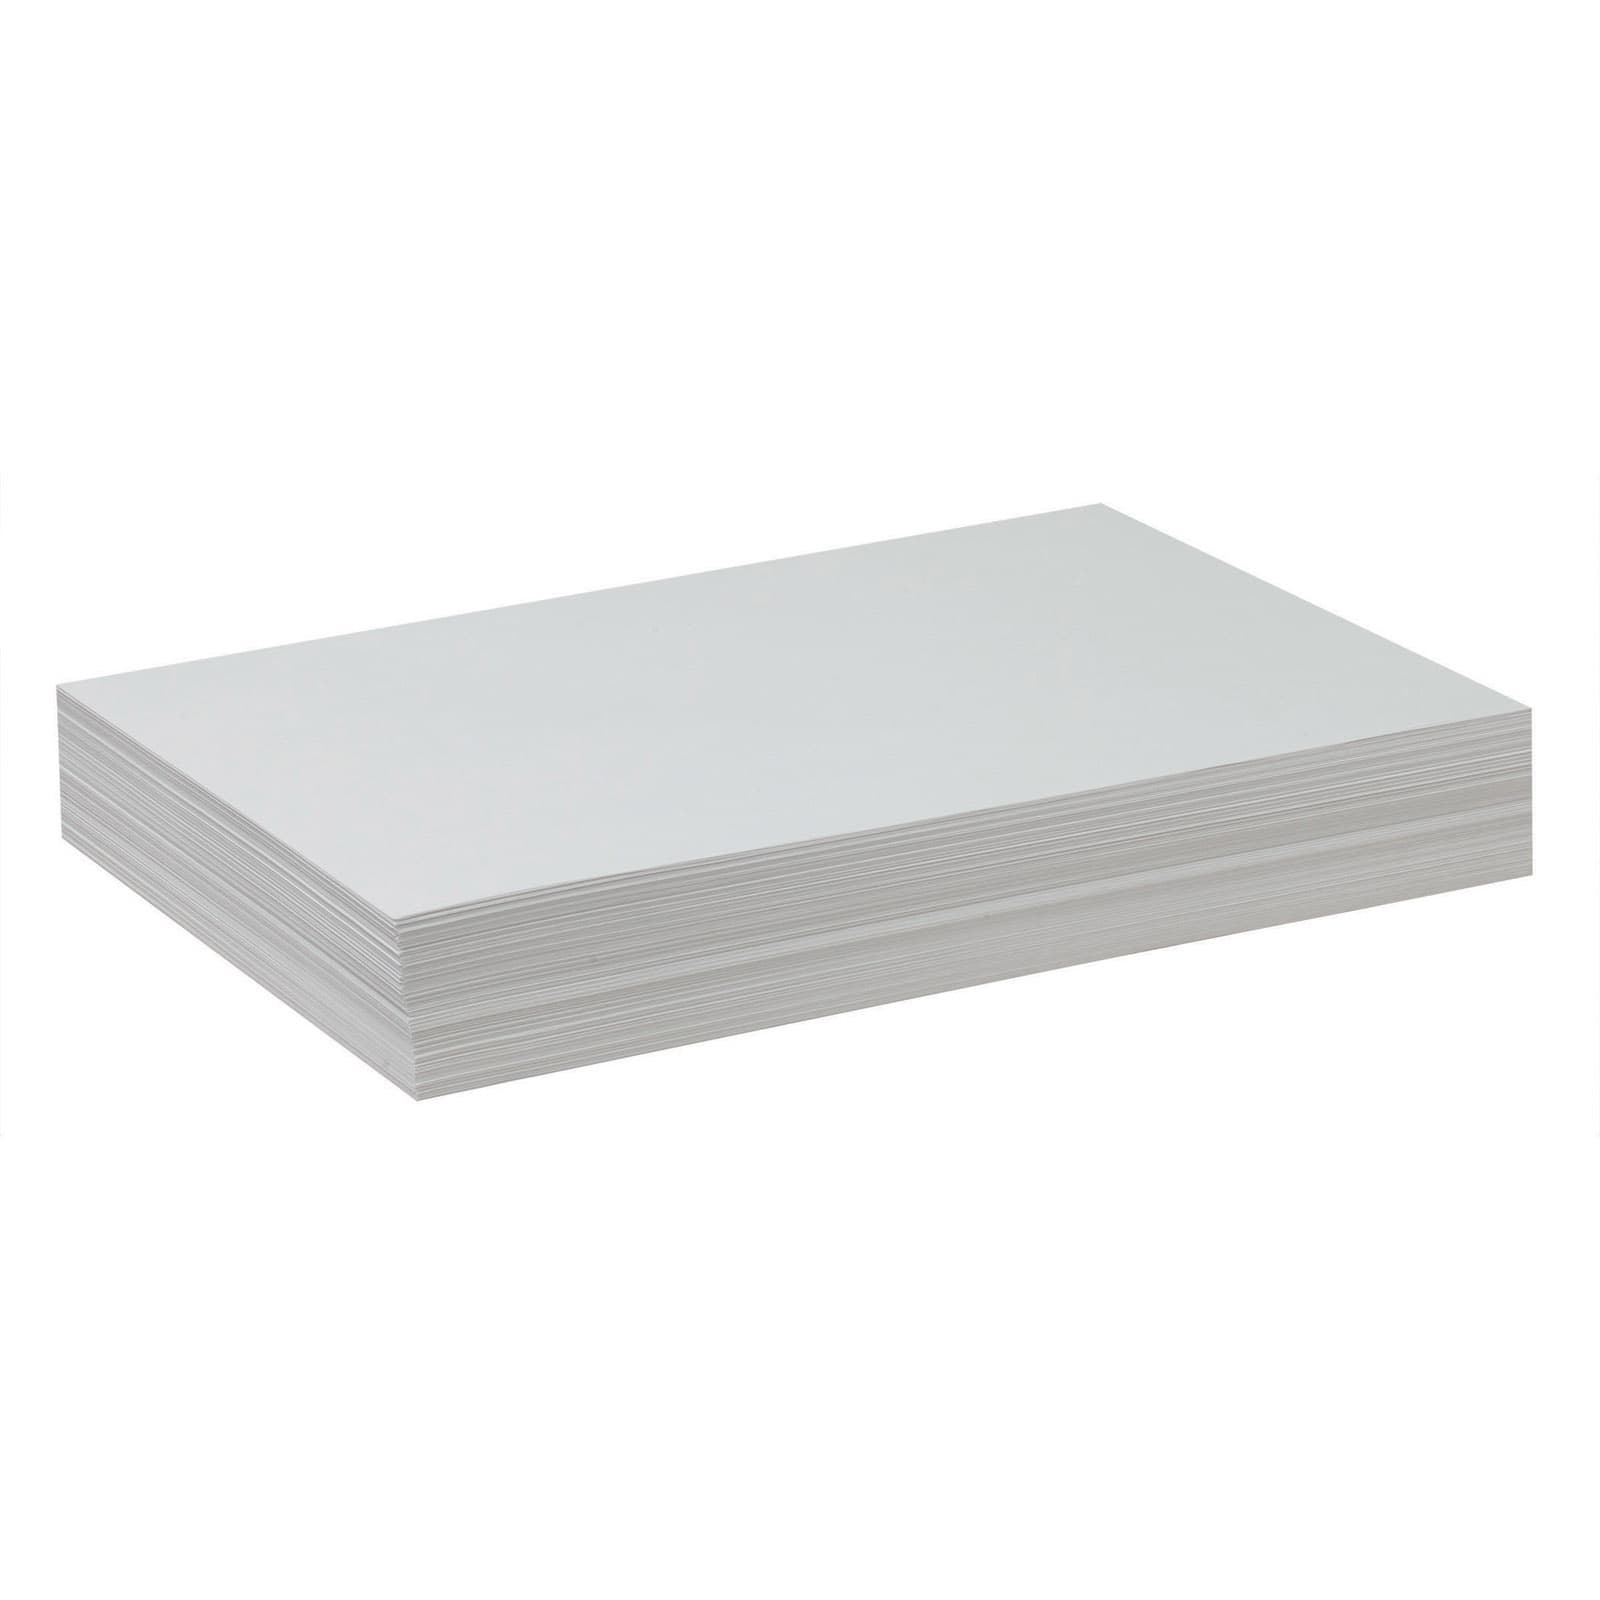 Purchase the Pacon® White Drawing Paper, 12" x 18", 500ct. at